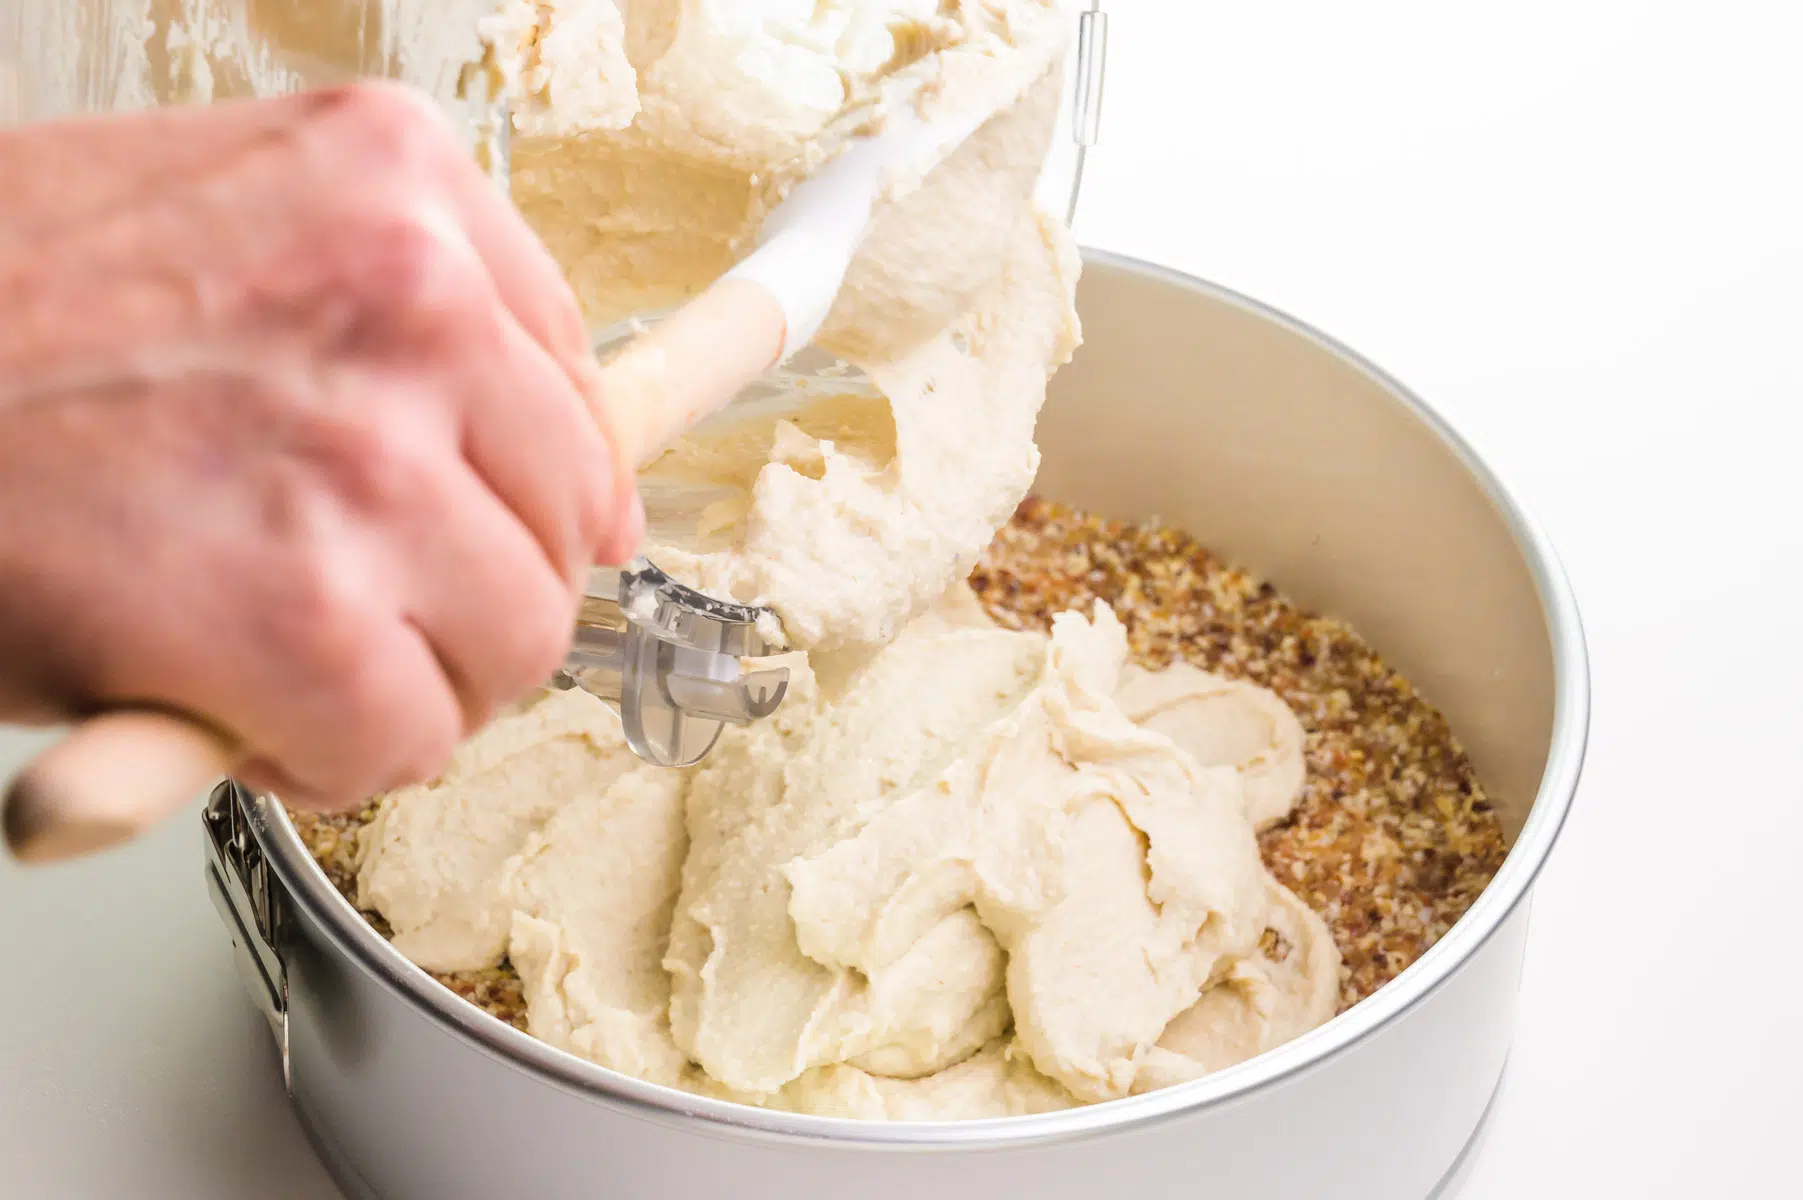 A hand uses a spatula to spoon cashew filling from a food processor to a springform pan.